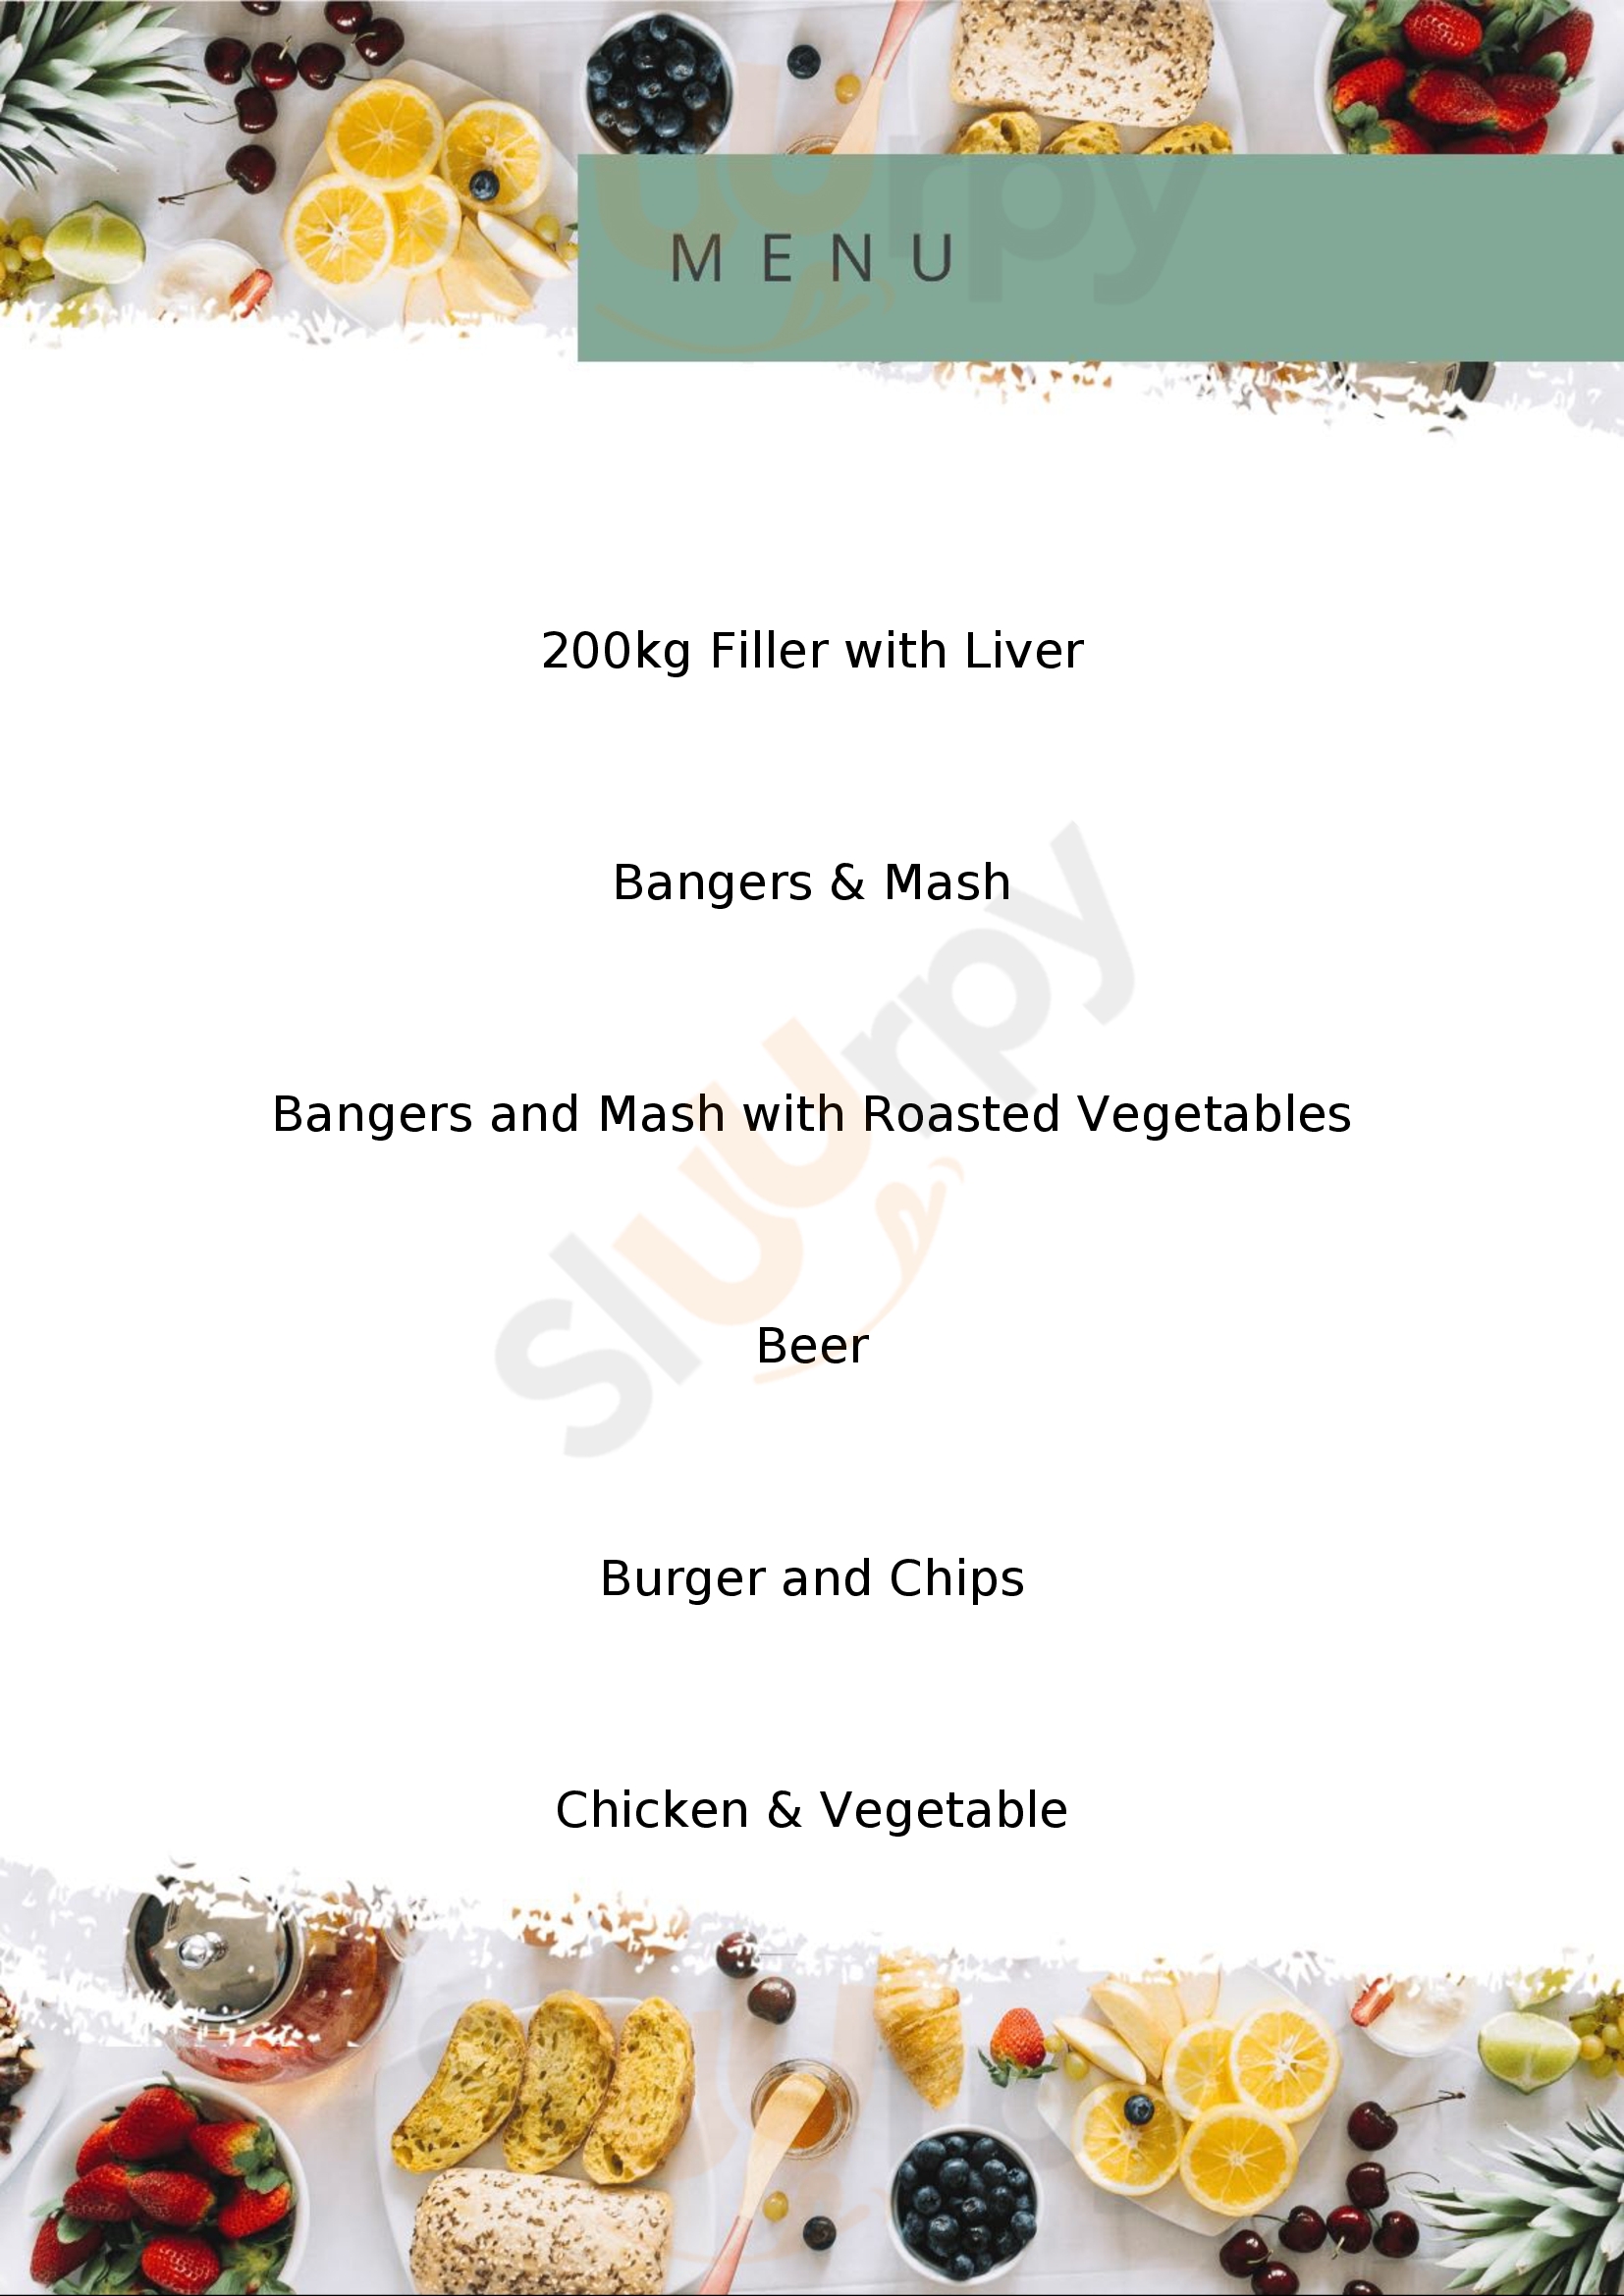 Barristers Grill & Cafe Newlands Menu - 1